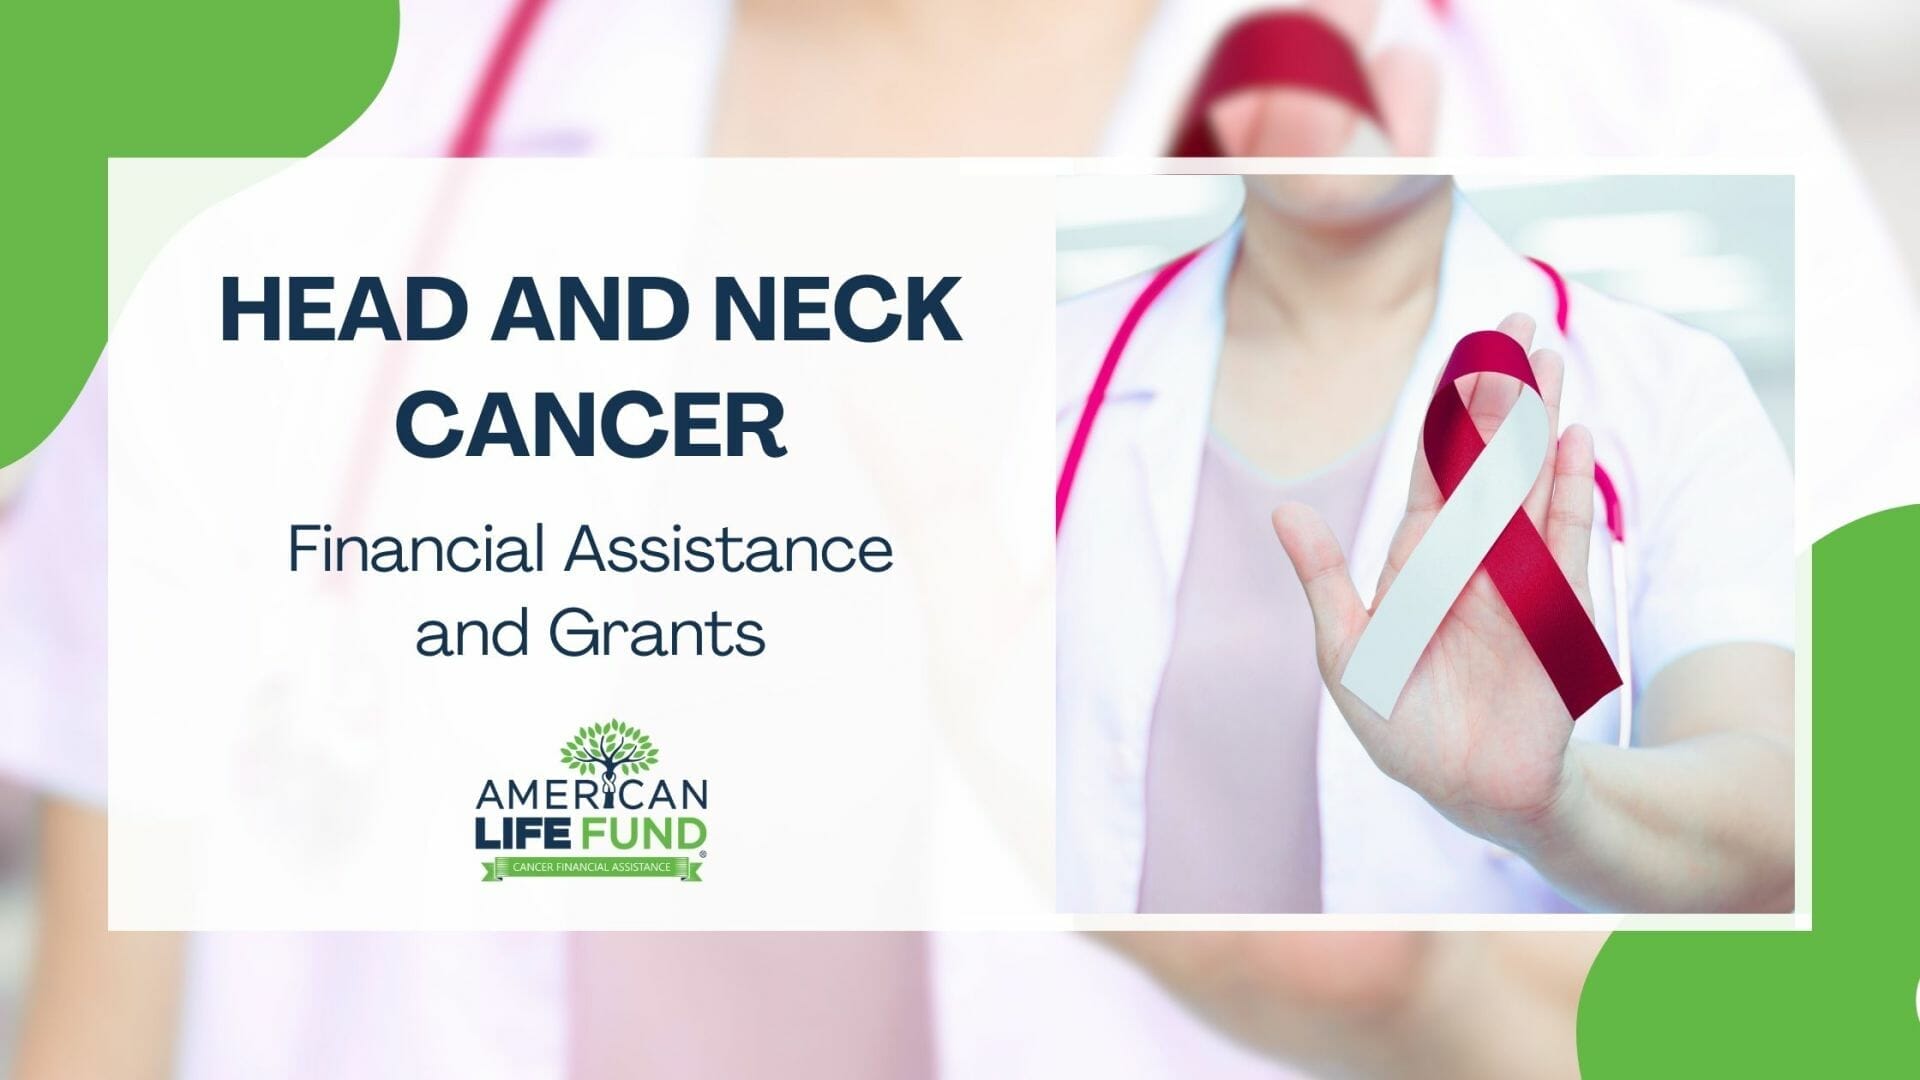 Blog feature image with a doctor holding red and white ribbon and a caption that says head and neck cancer, letting readers know this blog is about Financial Assistance Programs For Head and Neck Cancer Patients